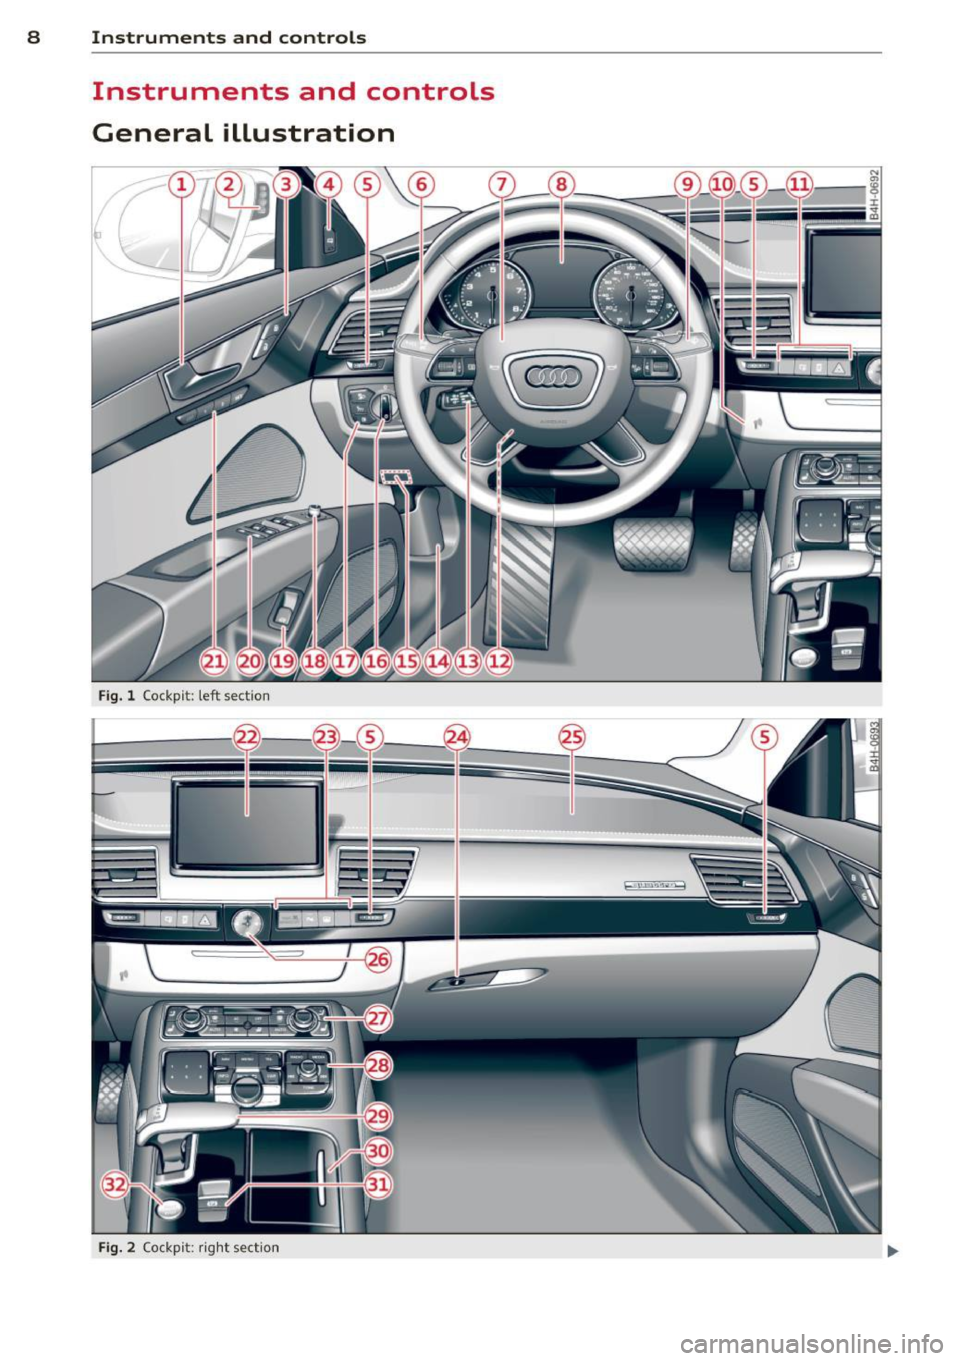 AUDI A8 2012  Owners Manual 8  Instruments and controls 
Instruments  and  controls 
General  illustration 
Fig. l Cockp it:  left  sect io n 
Fig. 2 Co ck pi t: ri ght  sect io n  